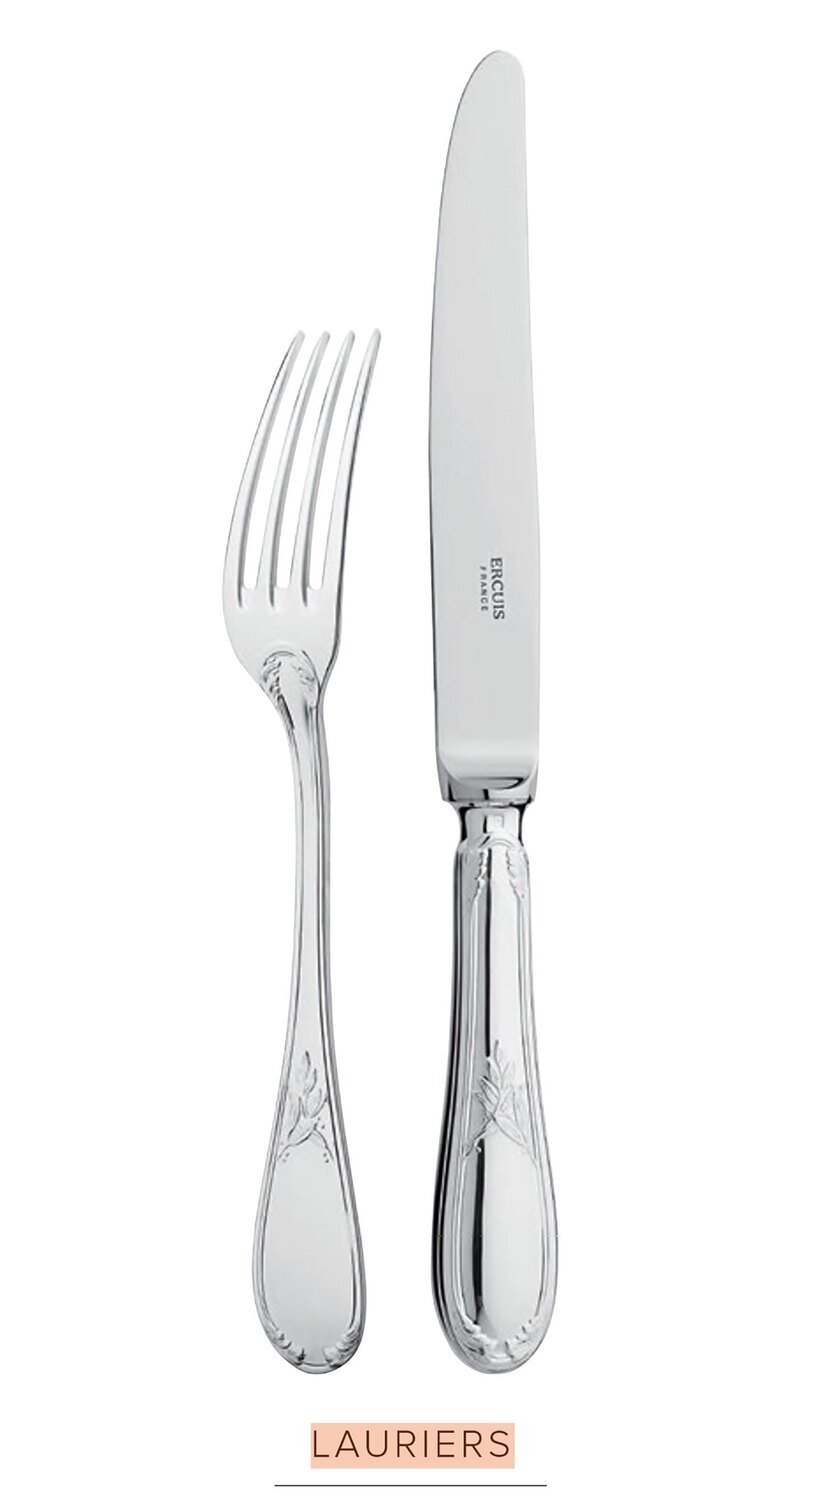 Ercuis Lauriers Moka Spoon Silver Plated F650460-10